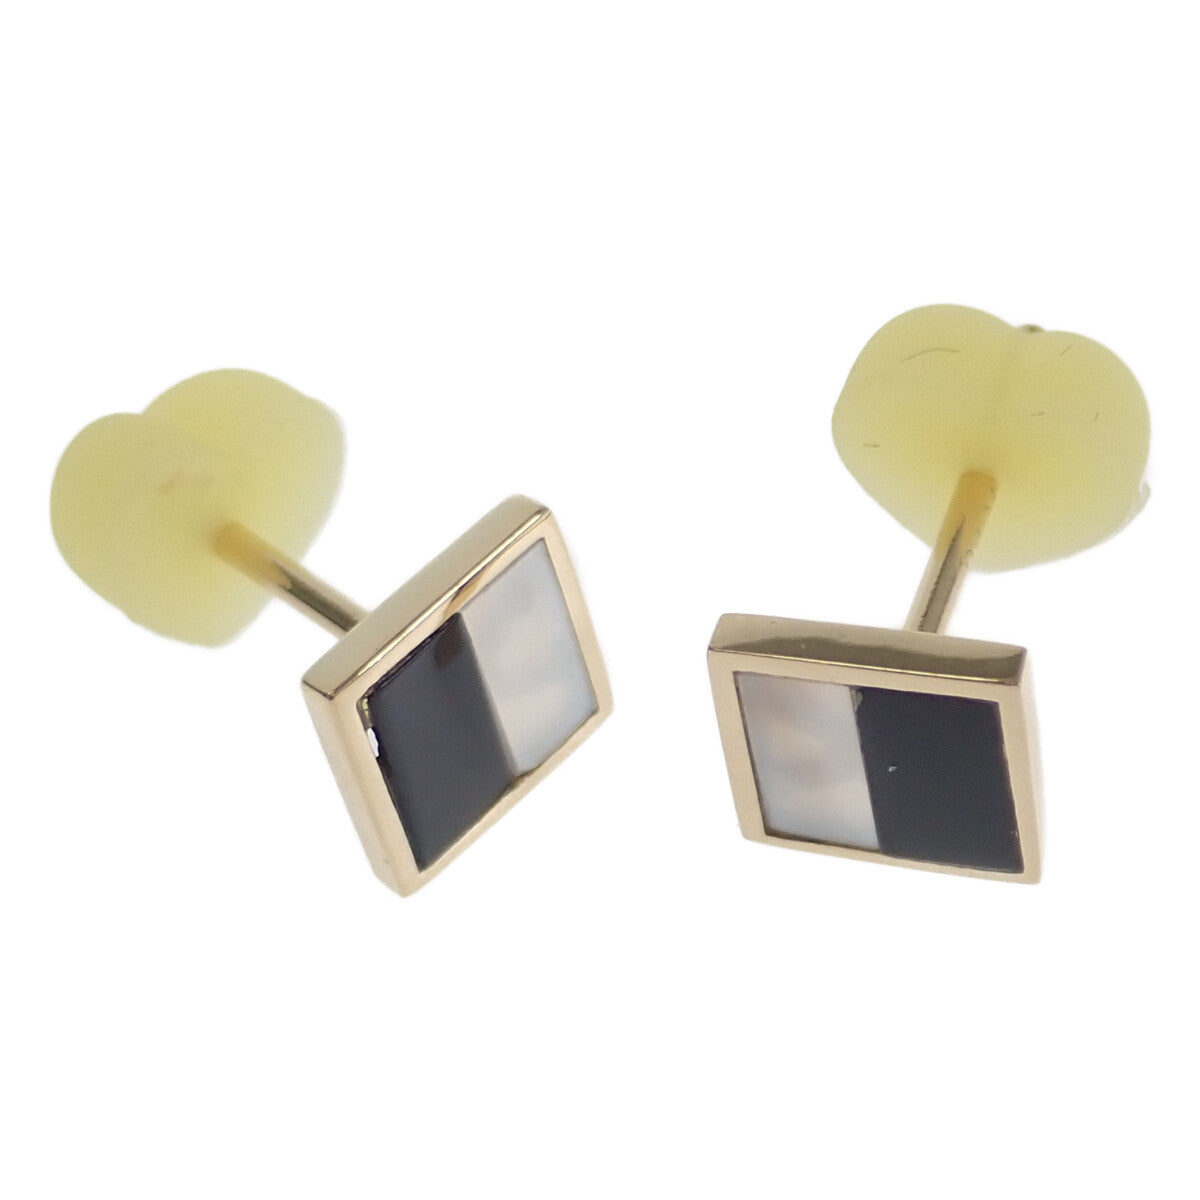 LuxUness  K18 Yellow Gold, Square Design, Onyx Shell Black Earrings for Women  in Excellent condition